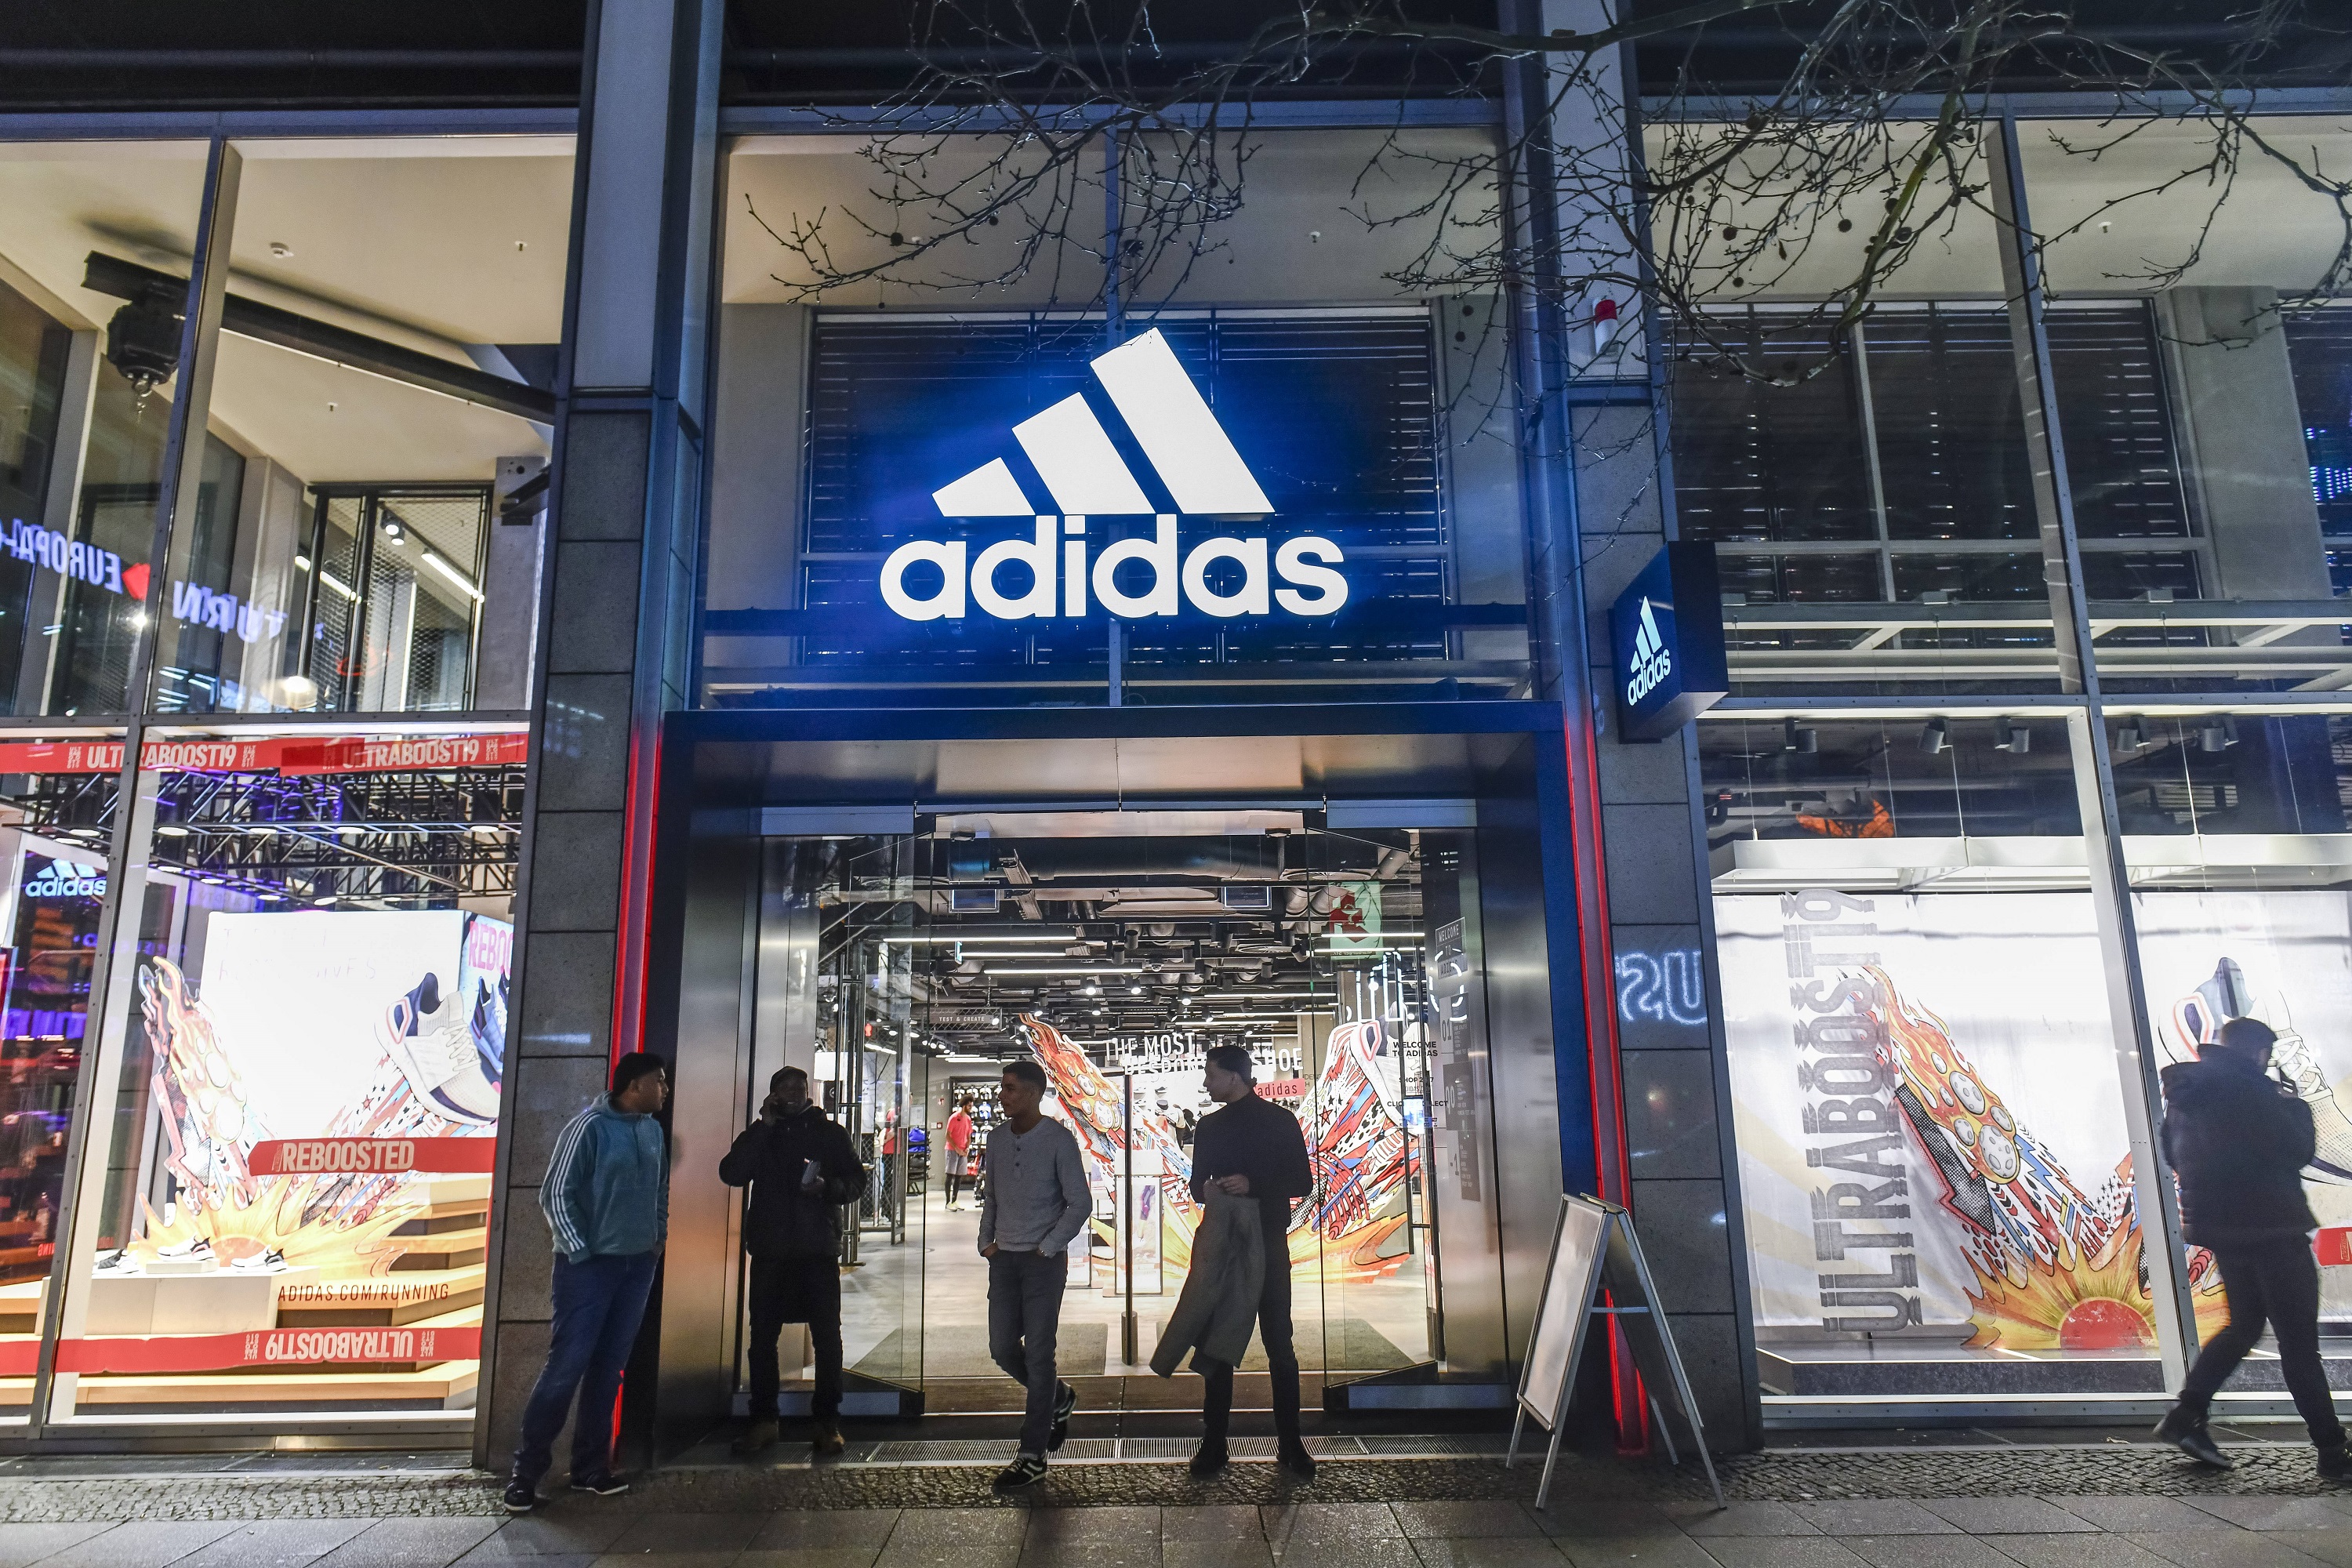 Adidas Year 2018 - and Worries About Europe